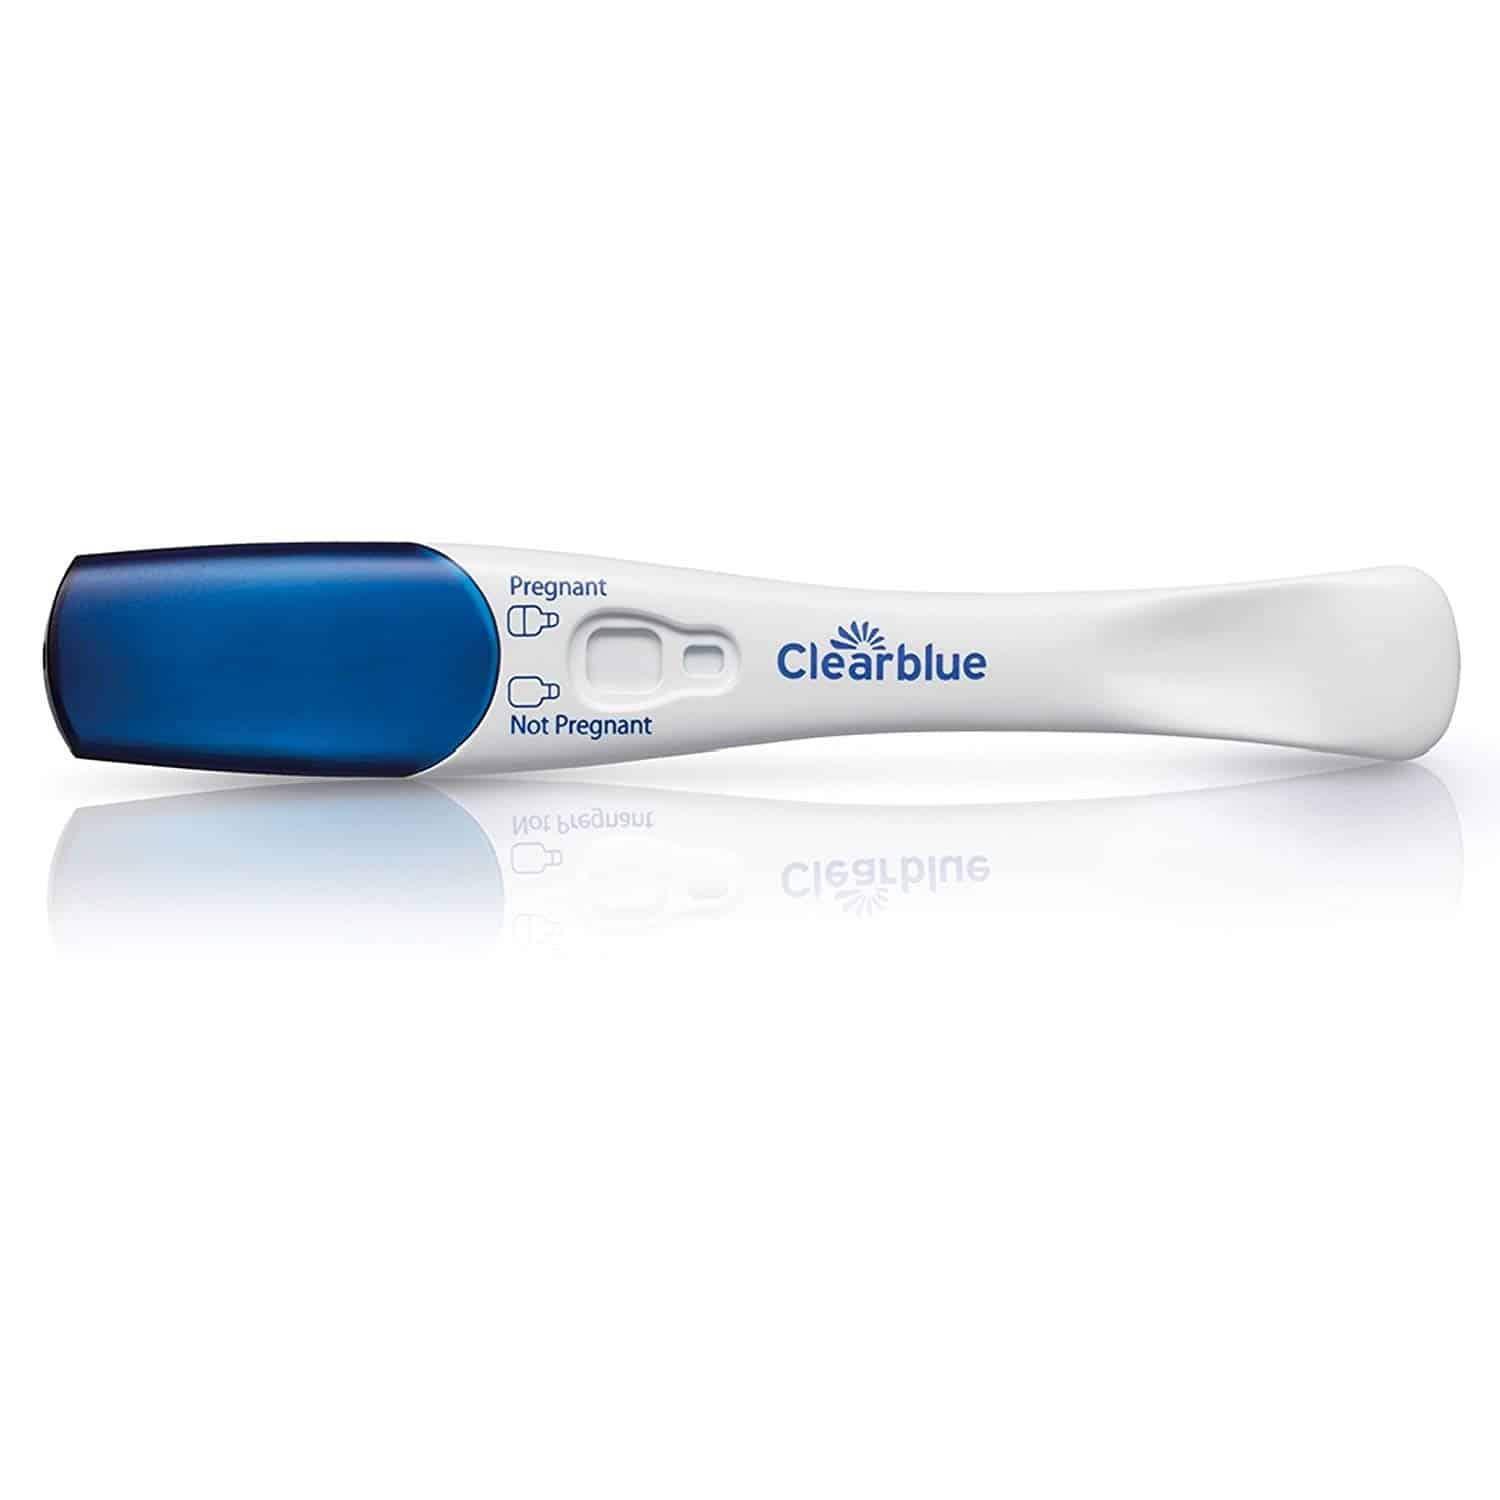 Clearblue Early Detection Pregnancy Test, Kit of 2 Tests, Results 6 ...